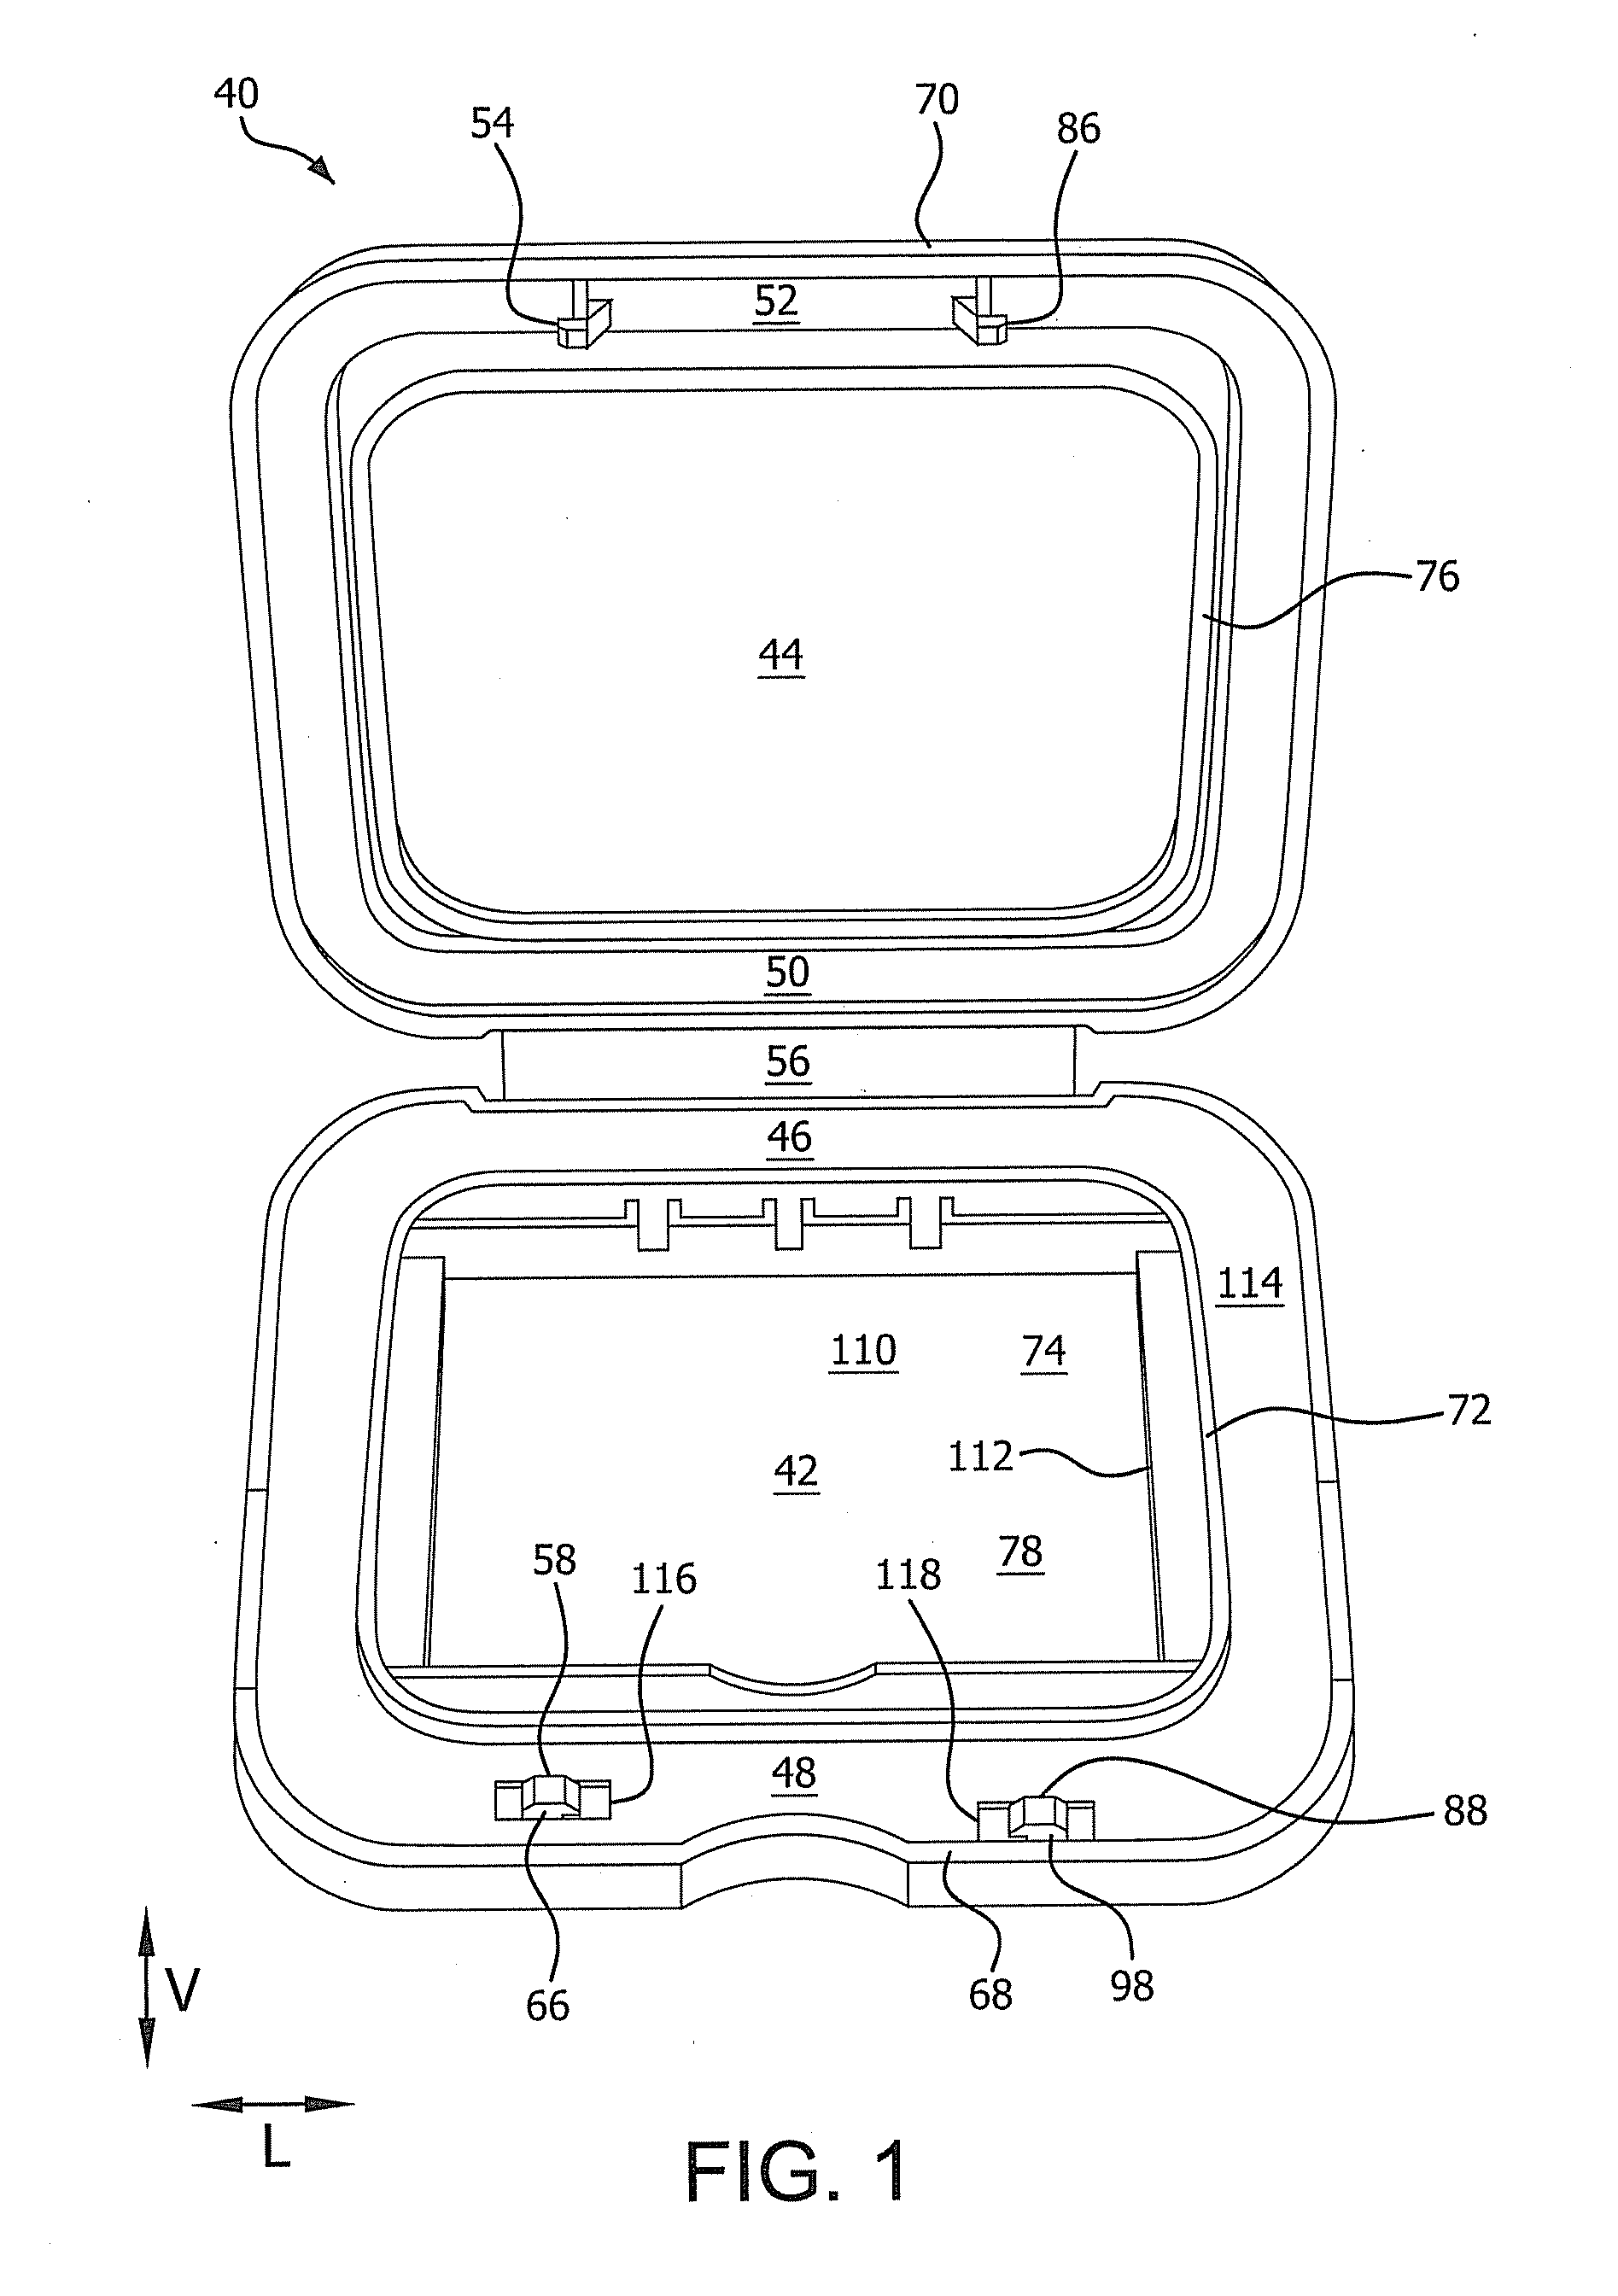 Two-shell and two-drawer containers